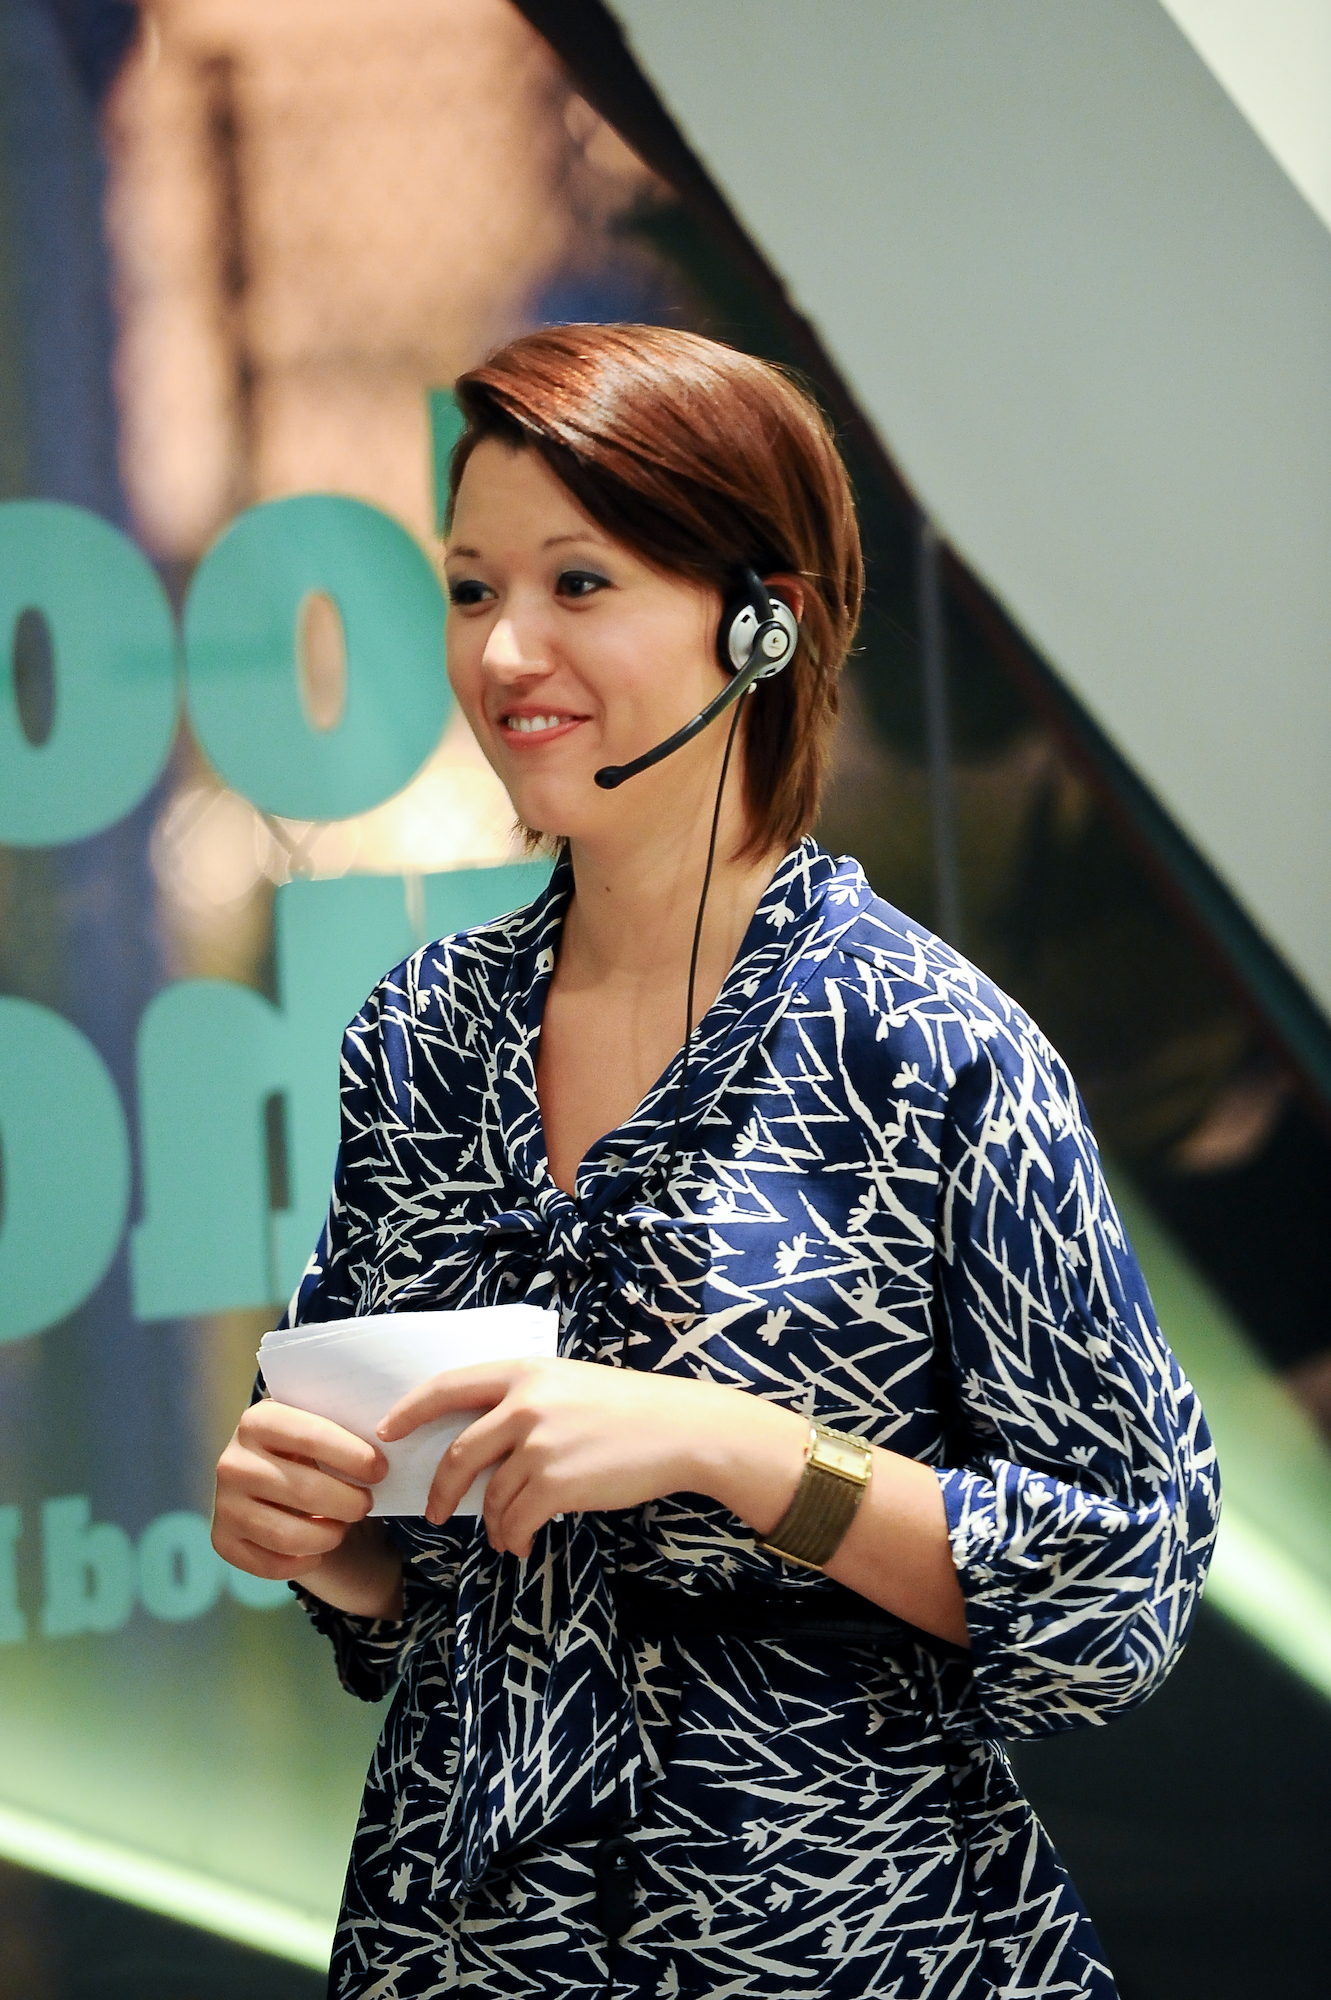 Woman with a microphone & earpiece